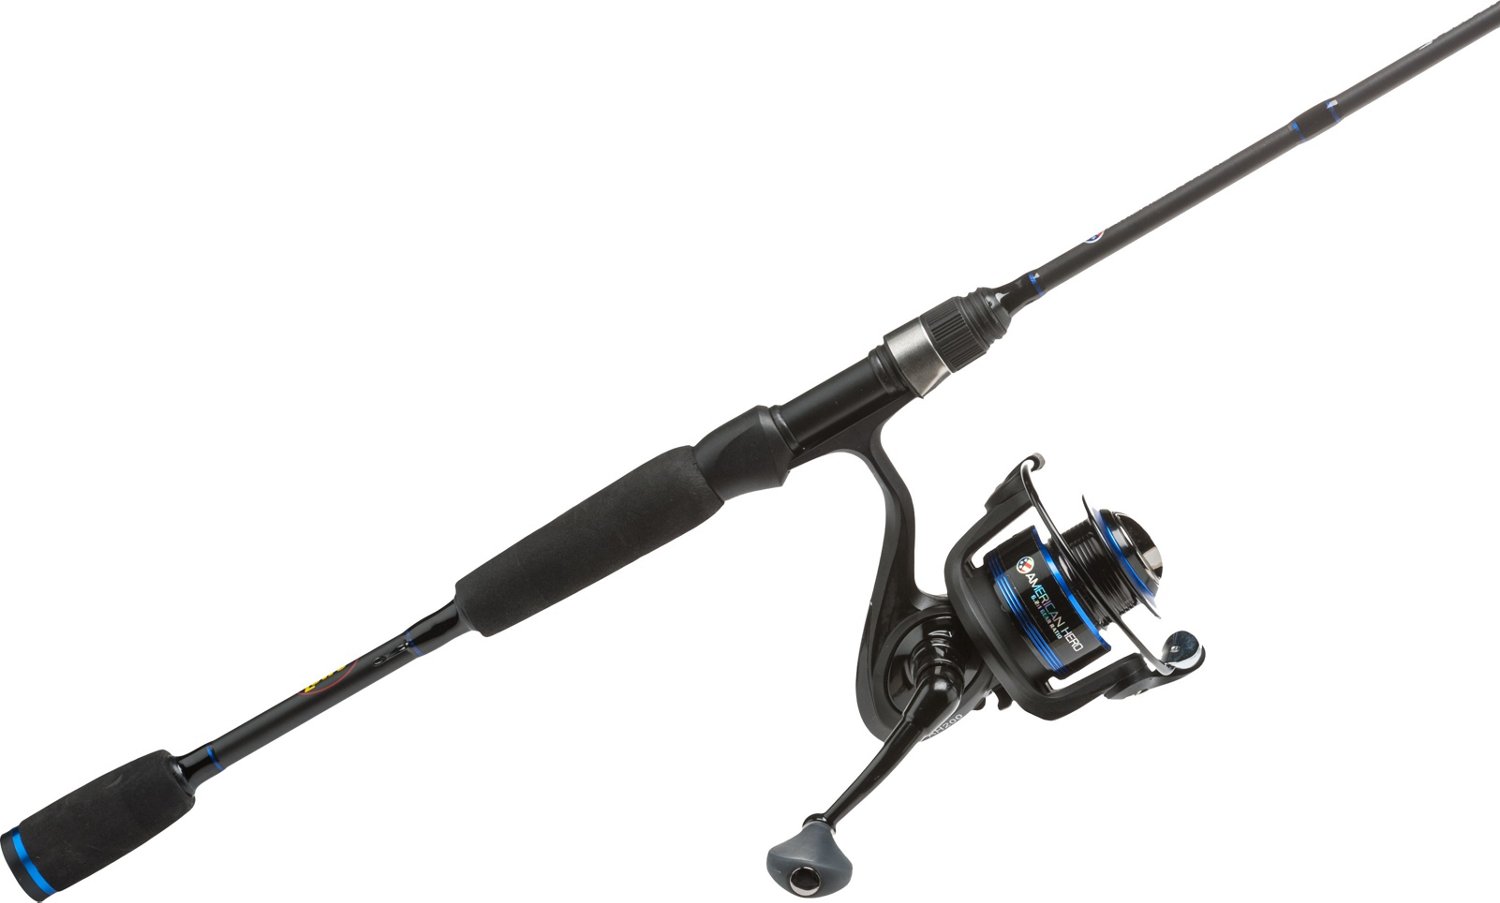 Lew's (AHC1056UL-2) American Hero Camo Spinning Reel and Fishing Rod Combo,  5-Foot 6-Inch 2-Piece IM7 Graphite Blank, Size 100 Reel, Right or